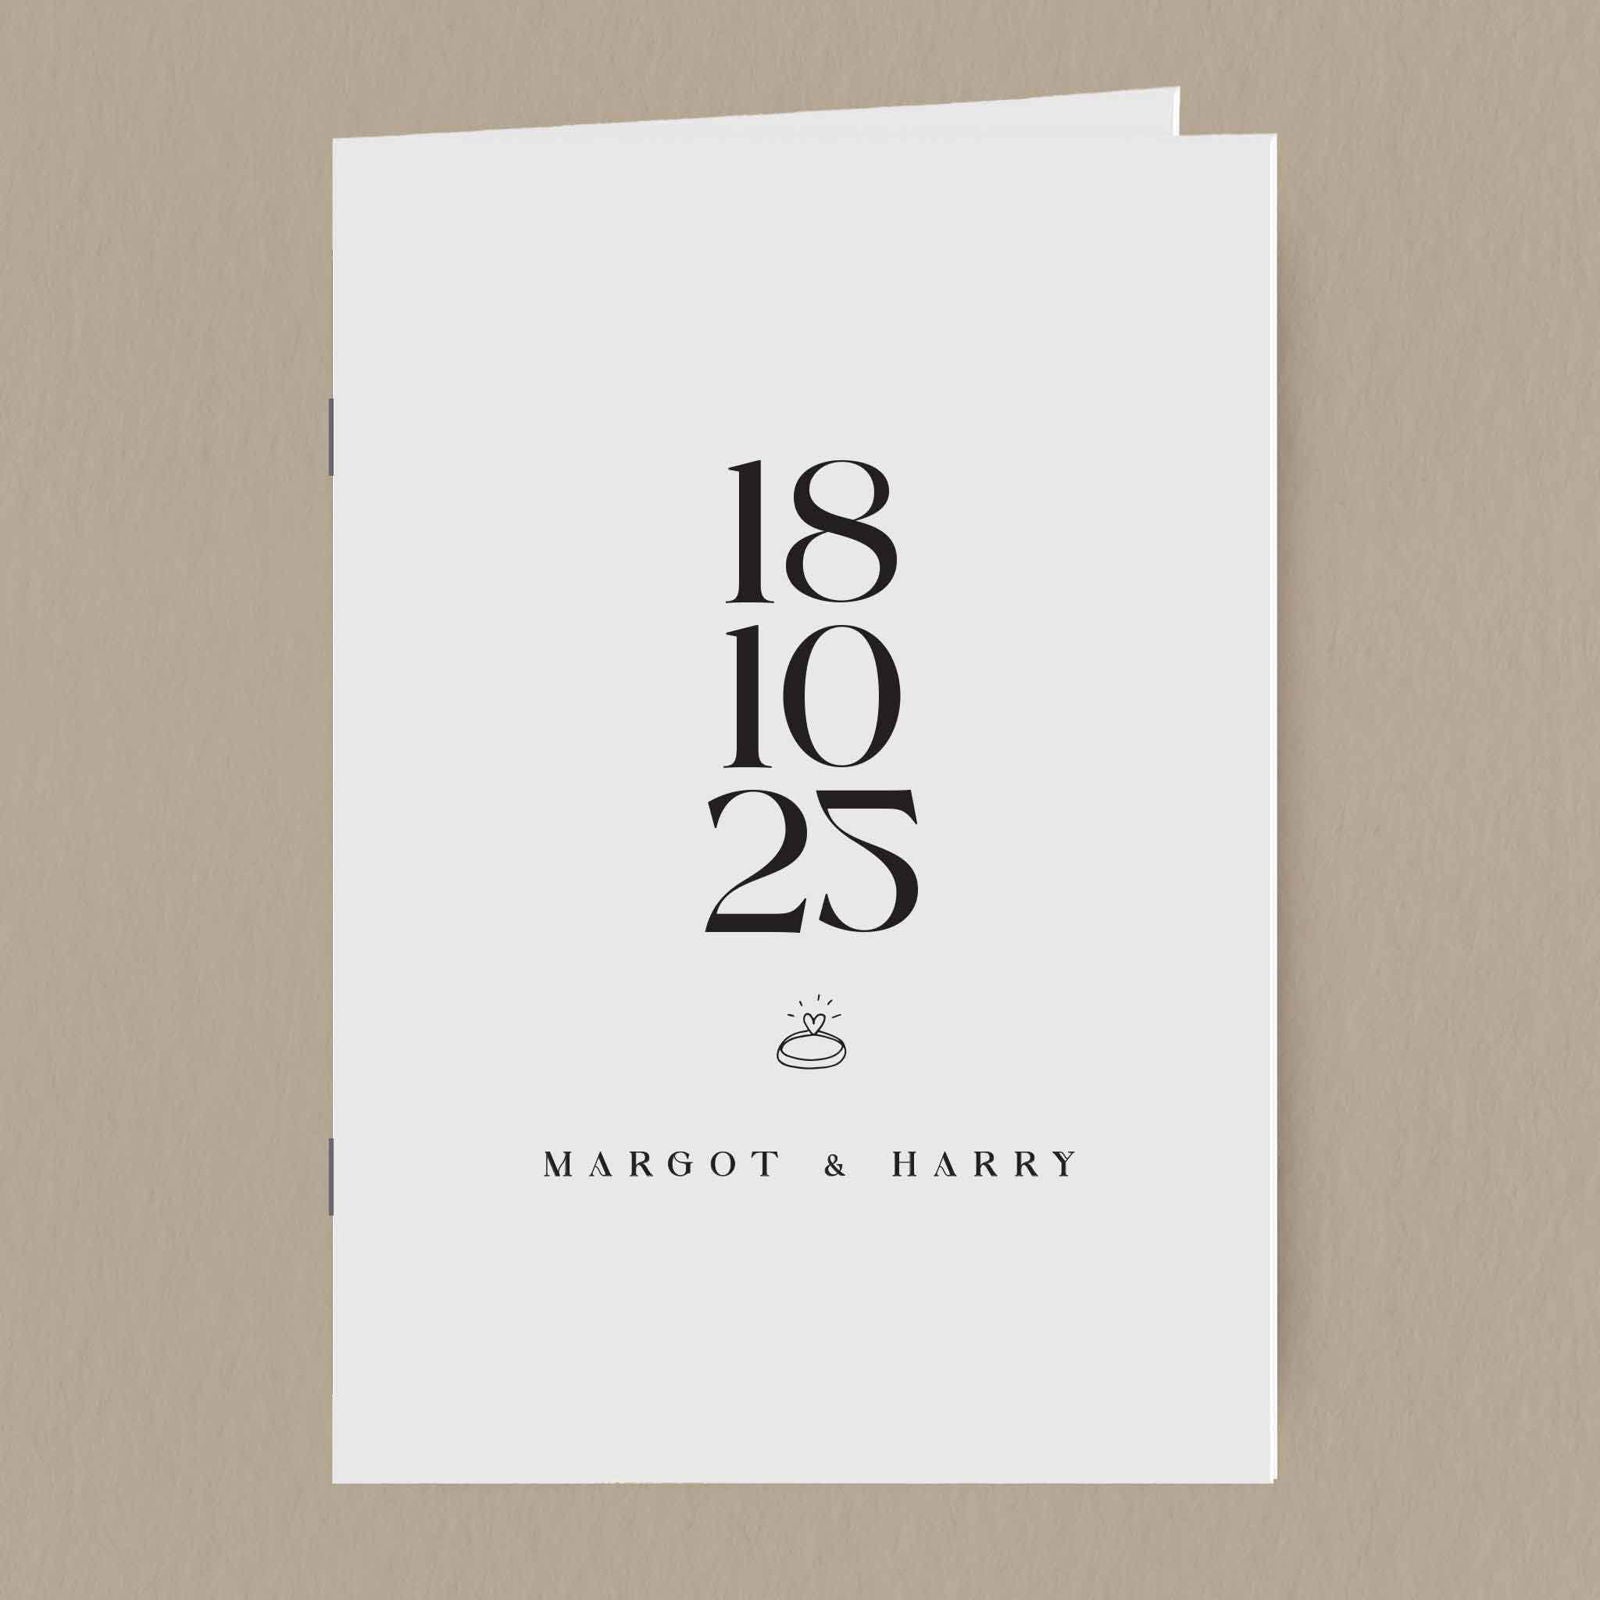 Margot Order Of Service  Ivy and Gold Wedding Stationery   